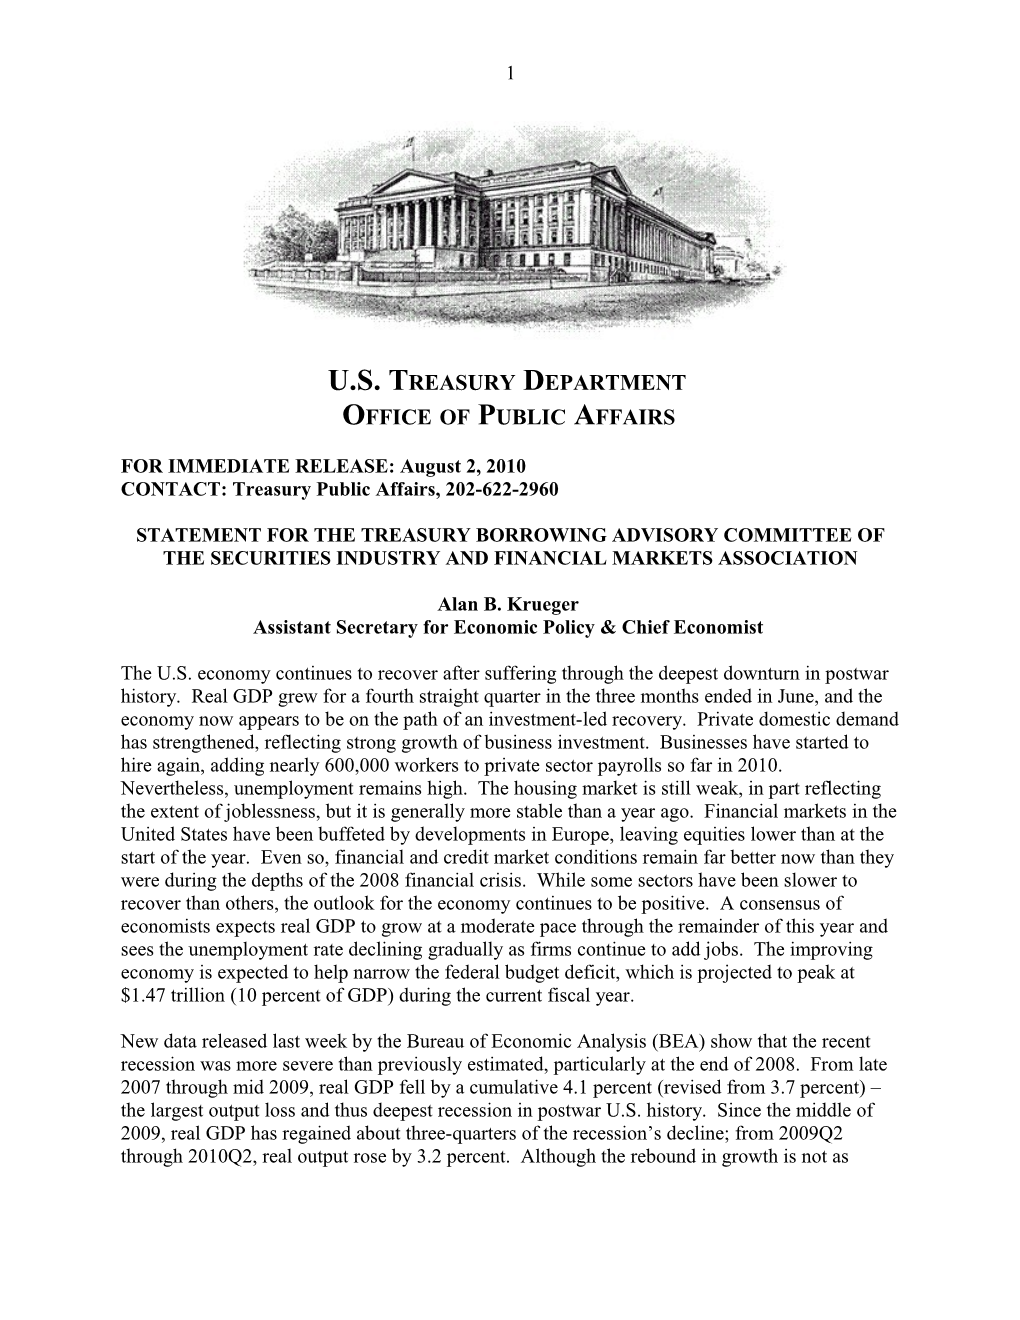 Statement of the Treasury Borrowing Advisory Committee of the Securities Industry and Financial